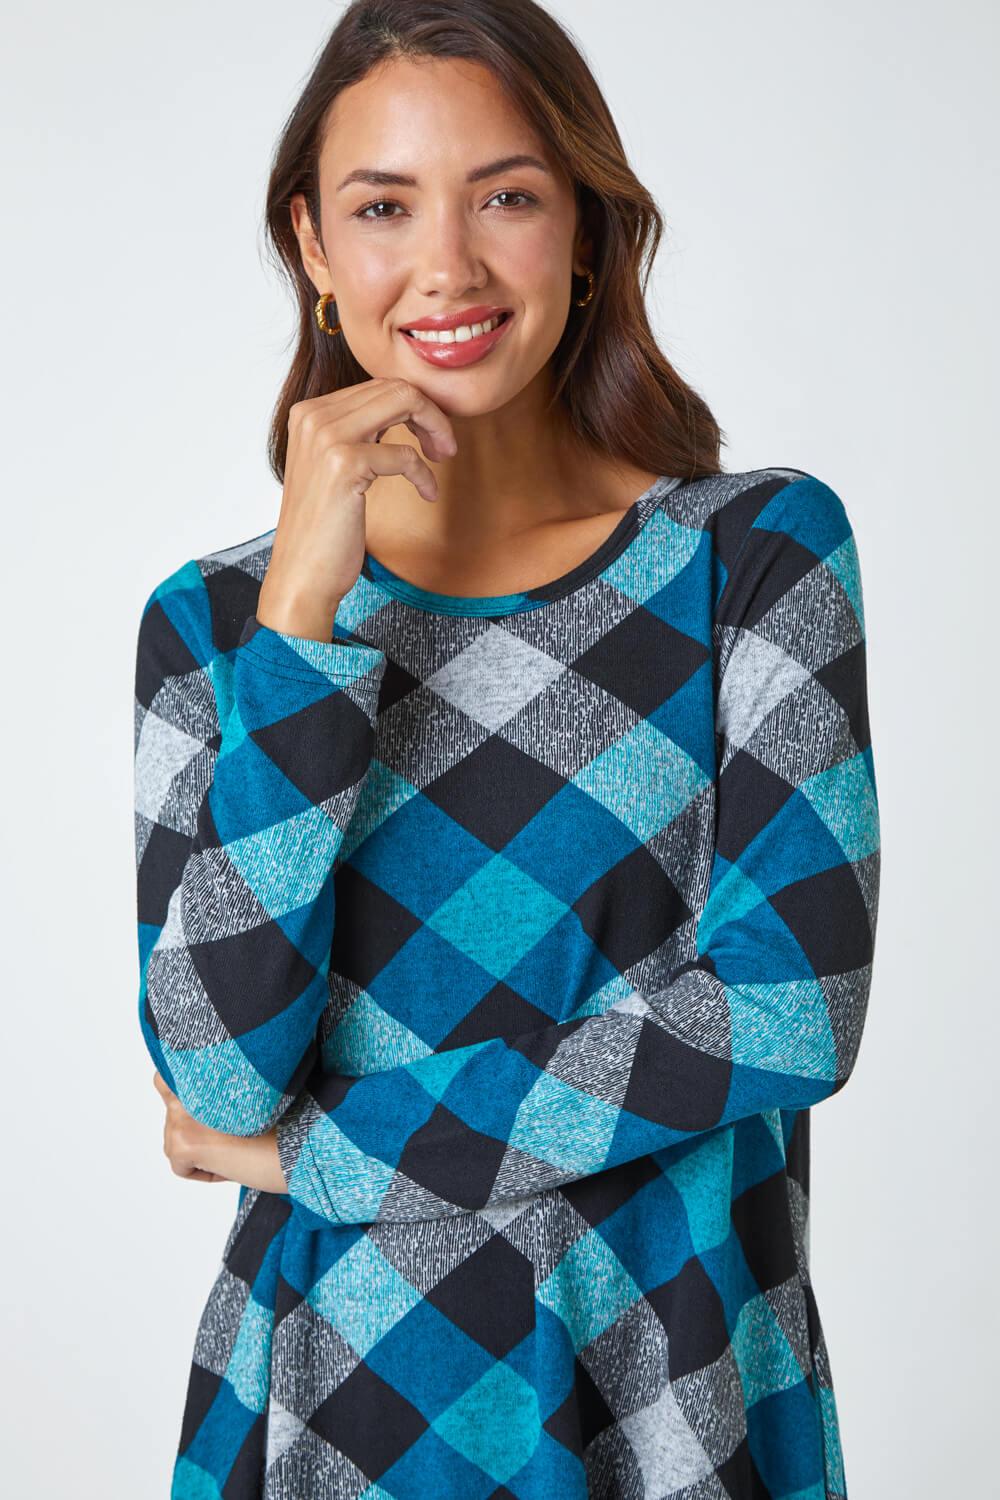 Teal Check Print Swing Stretch Dress, Image 4 of 5